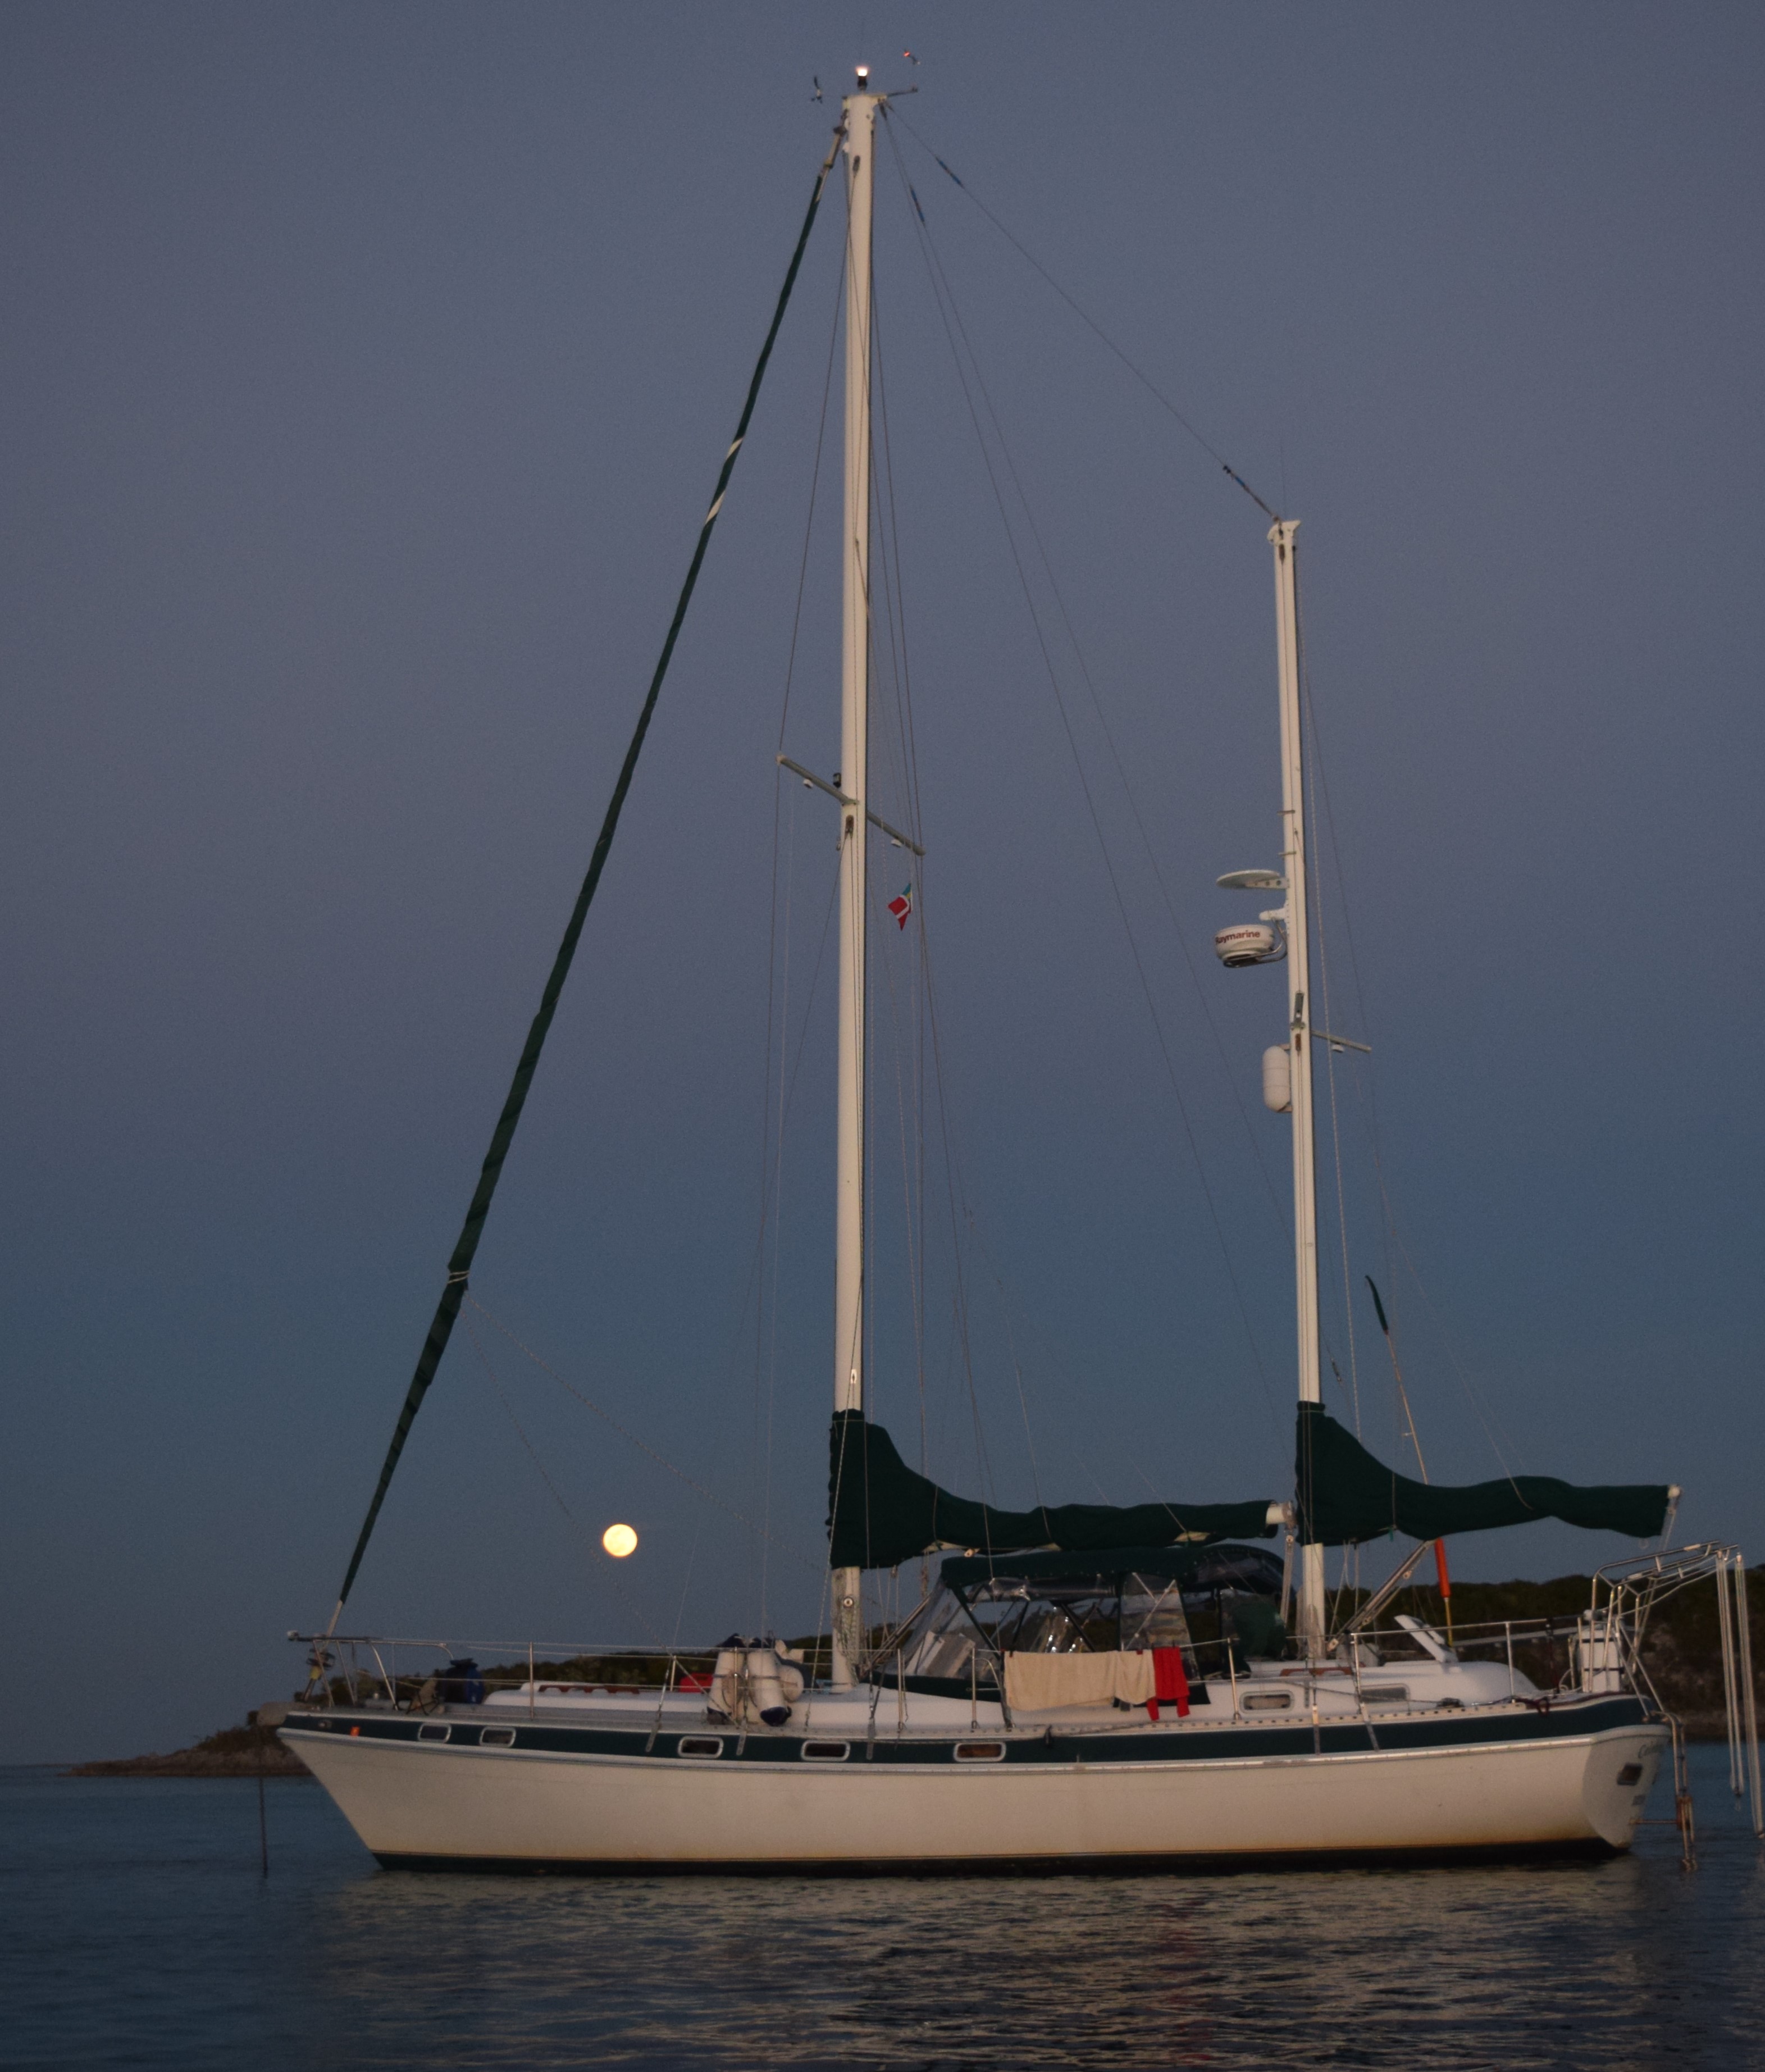 1979 Morgan 415 Out Island Ketch Sailboat for sale in St Petersburg, FL - image 7 